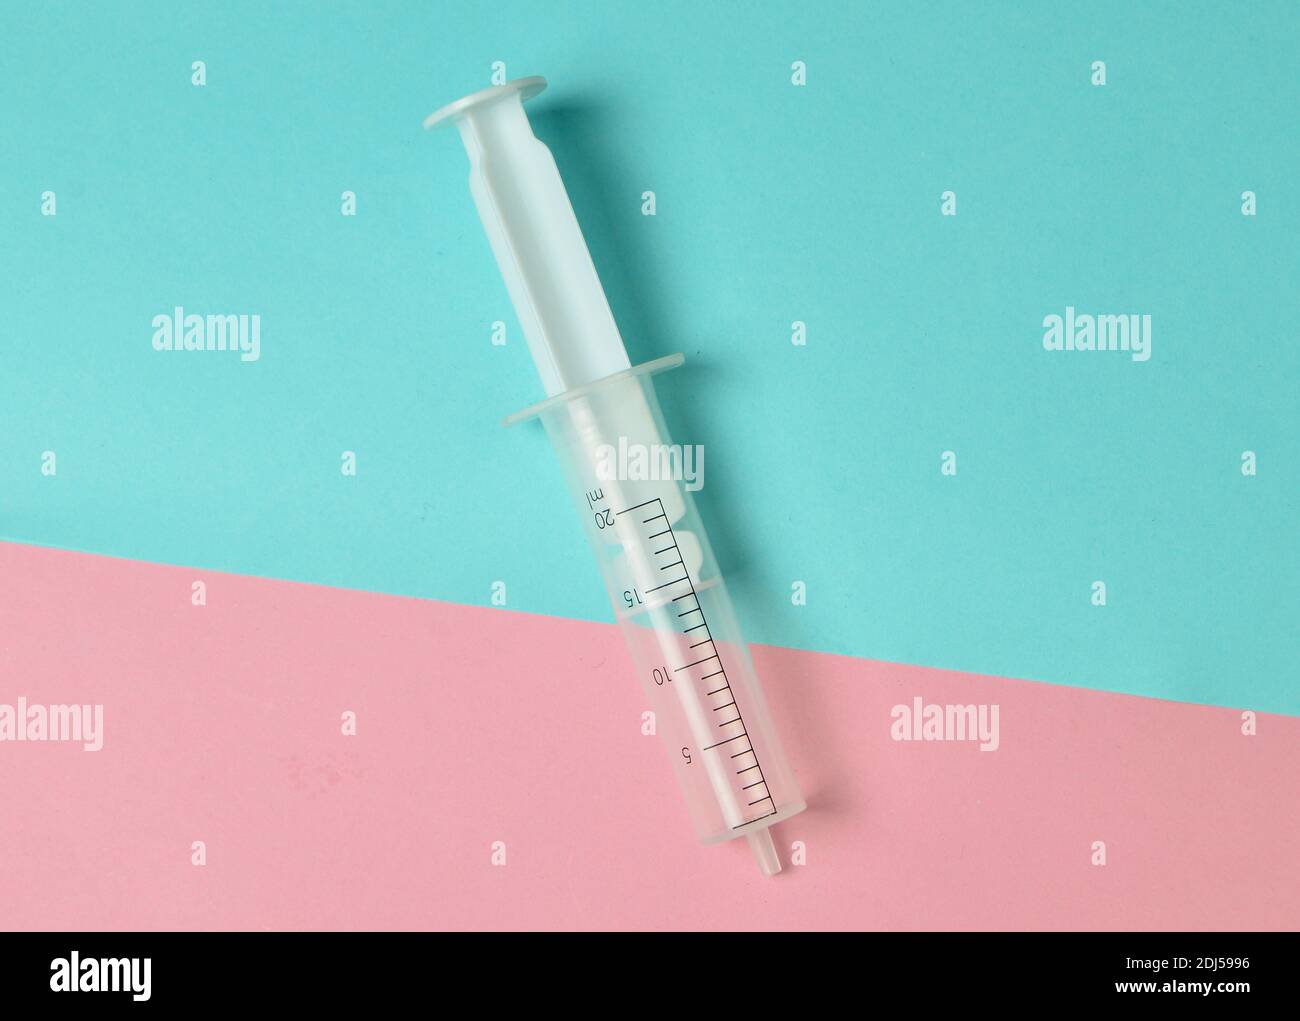 A medical syringe without a needle on a pastel background, top view, minimalism. Medical equipment. Stock Photo